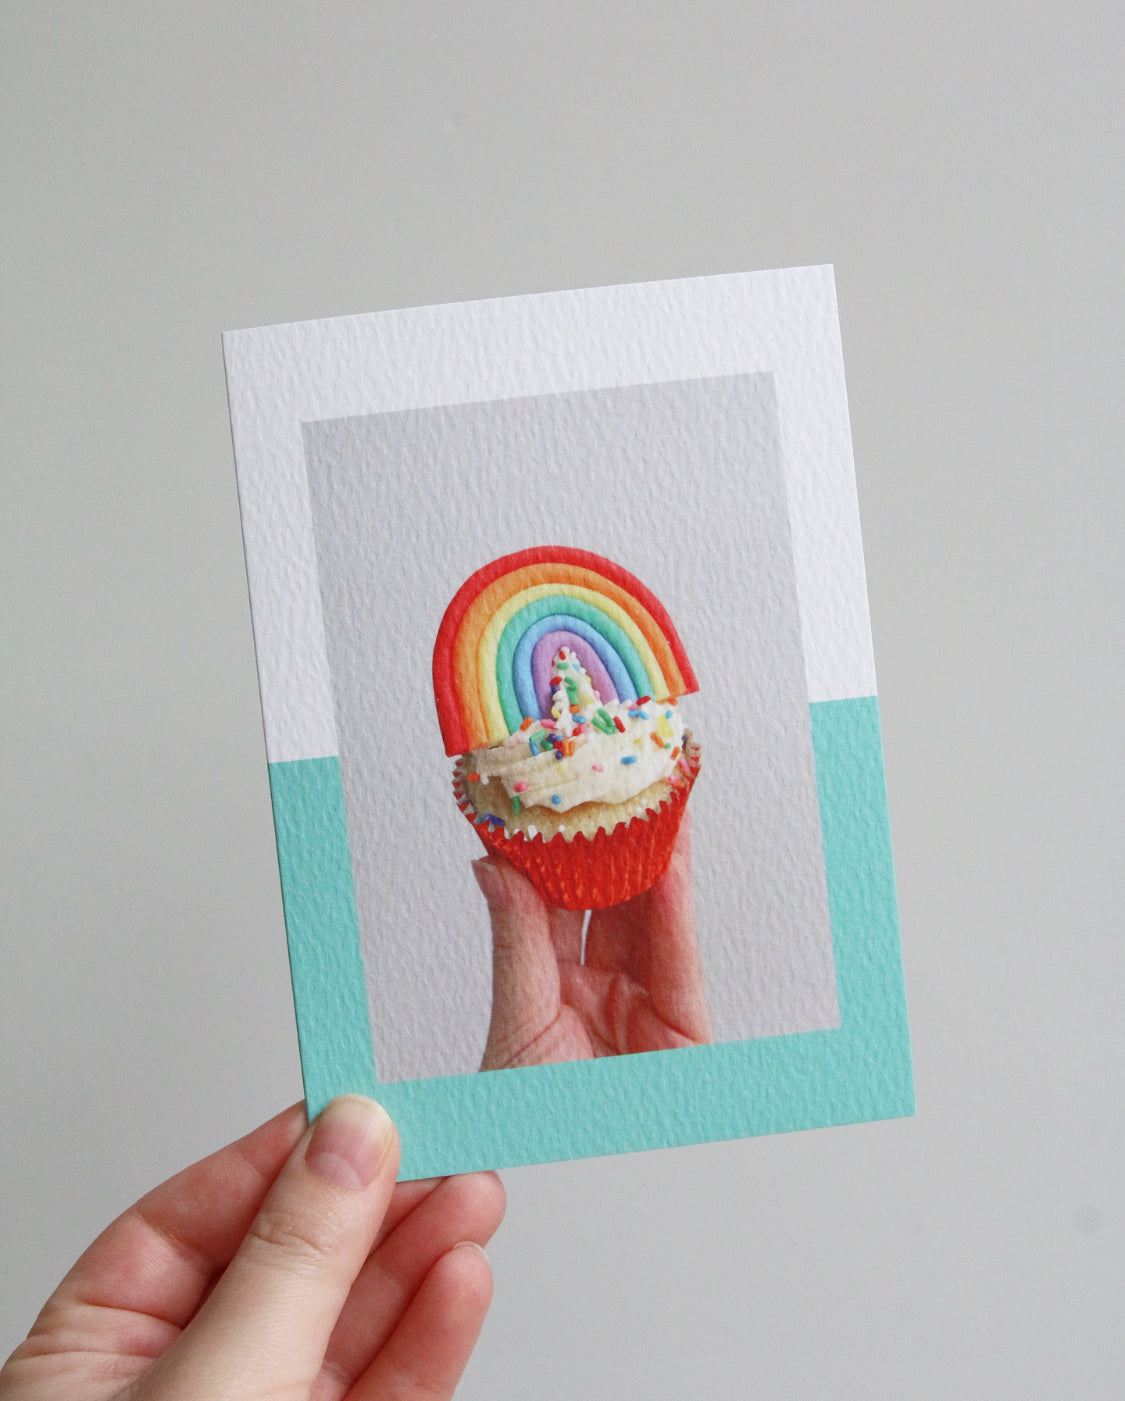 Birthday card with a photo of a cupcake with sprinkles and a fondant rainbow on top